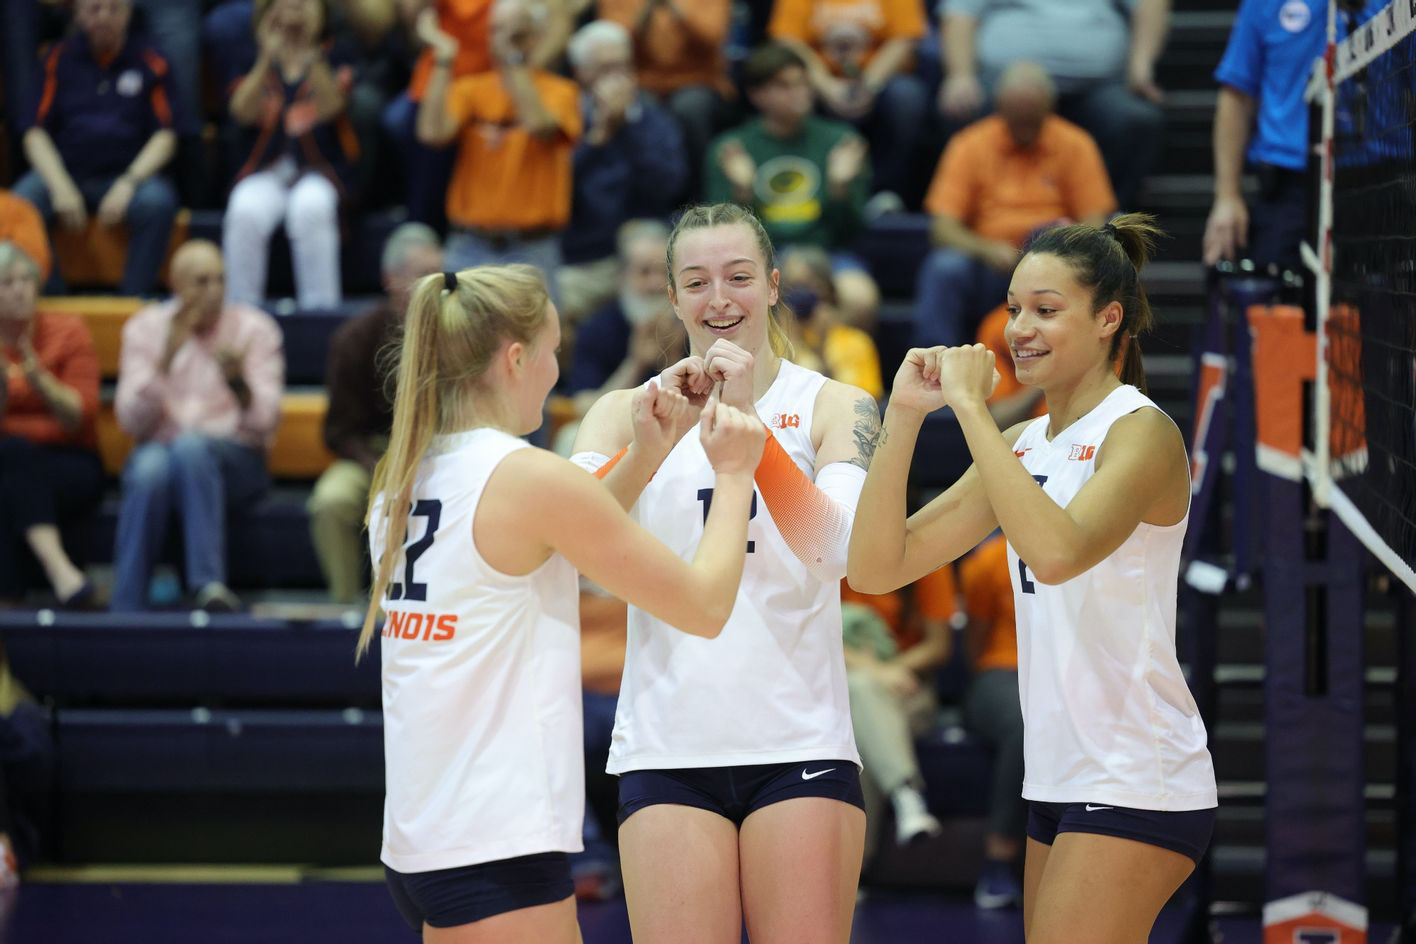 on-court photo of Illini Volleyball players Raina Terry, Brooke Mosher, and Rylee Hinton